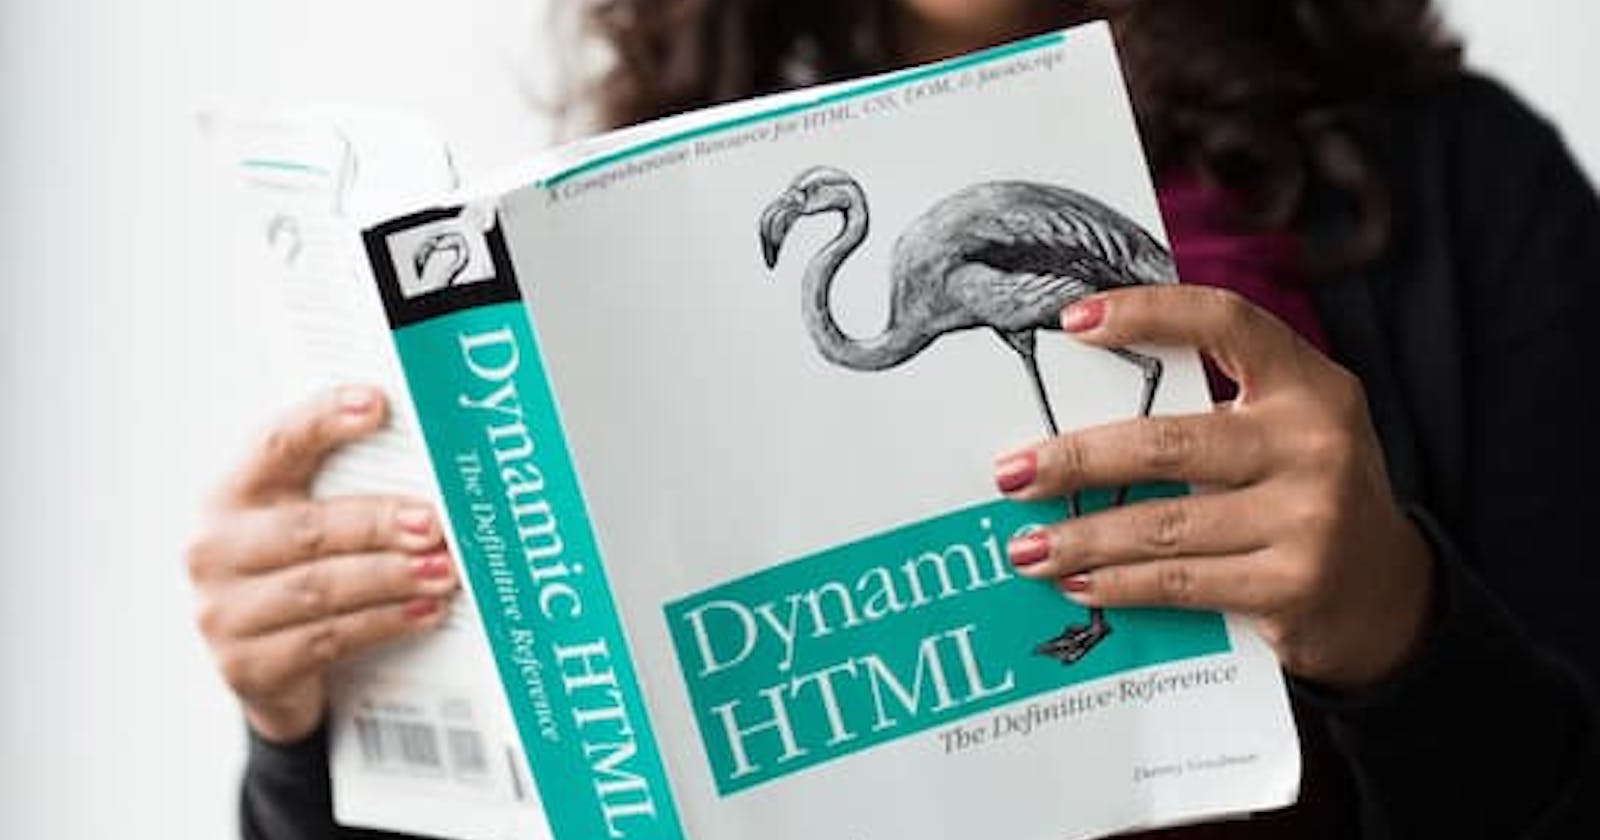 15 Best Web Development Books You Need to Learn in 2022